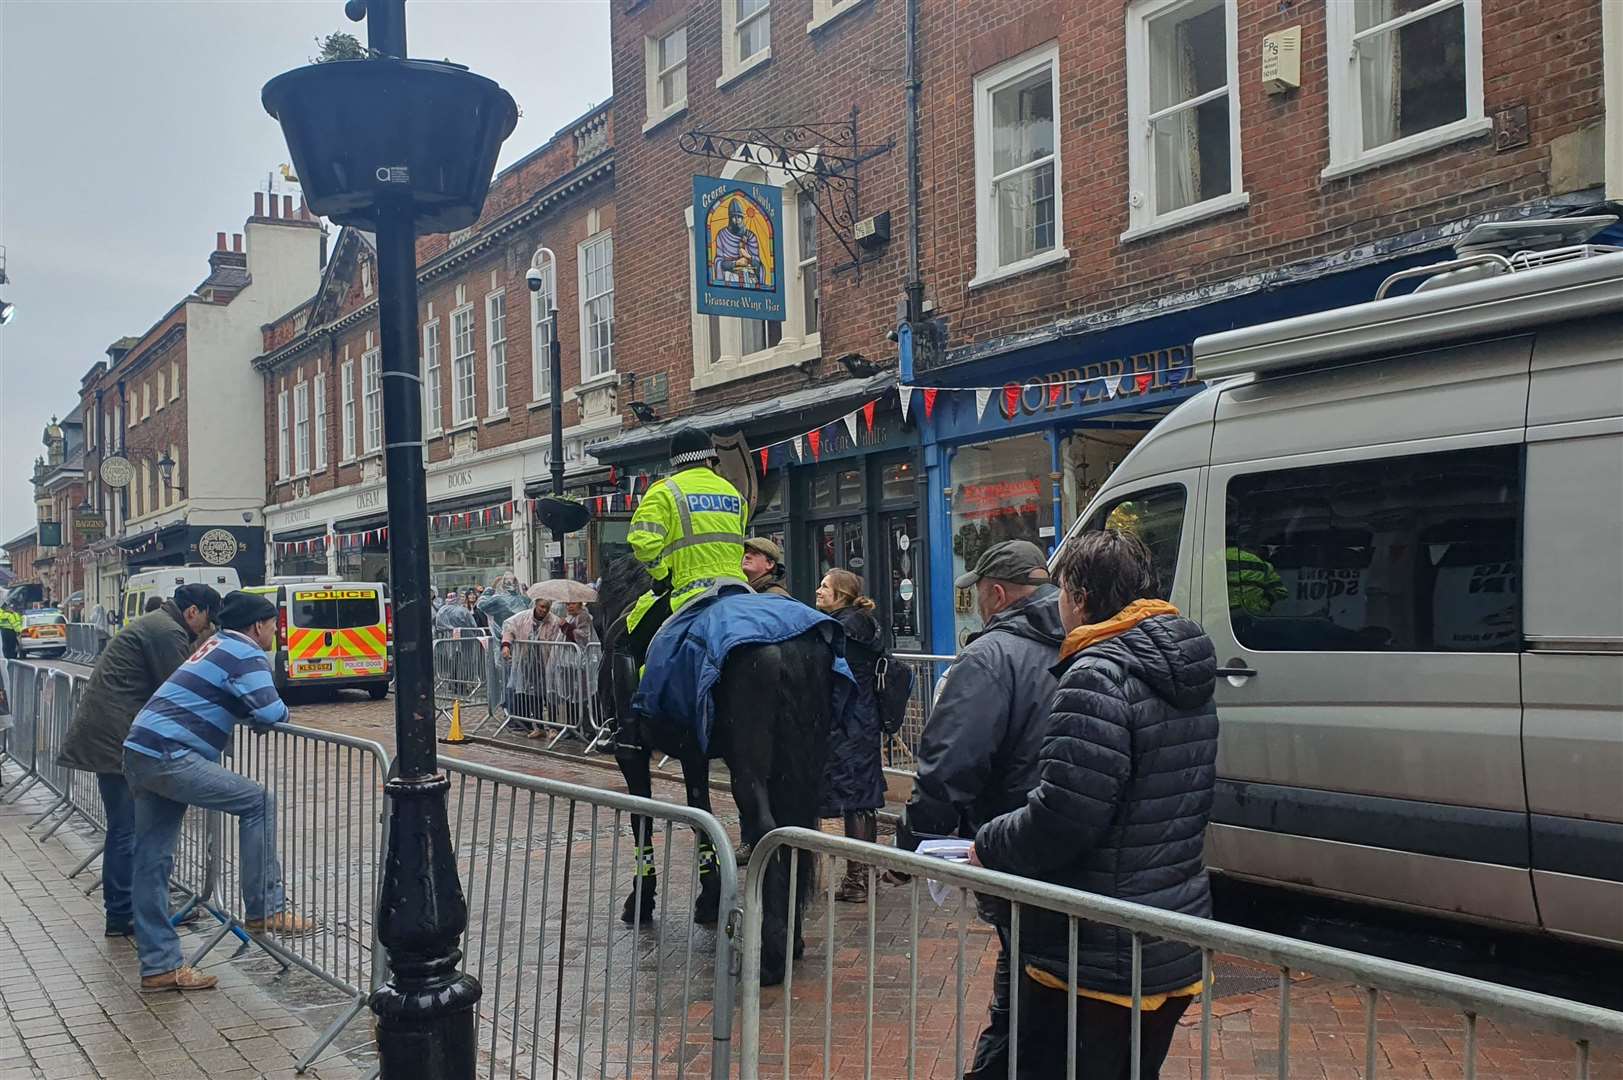 Netflix is filming in Rochester High Street for The Crown. Picture: Amy Treganna